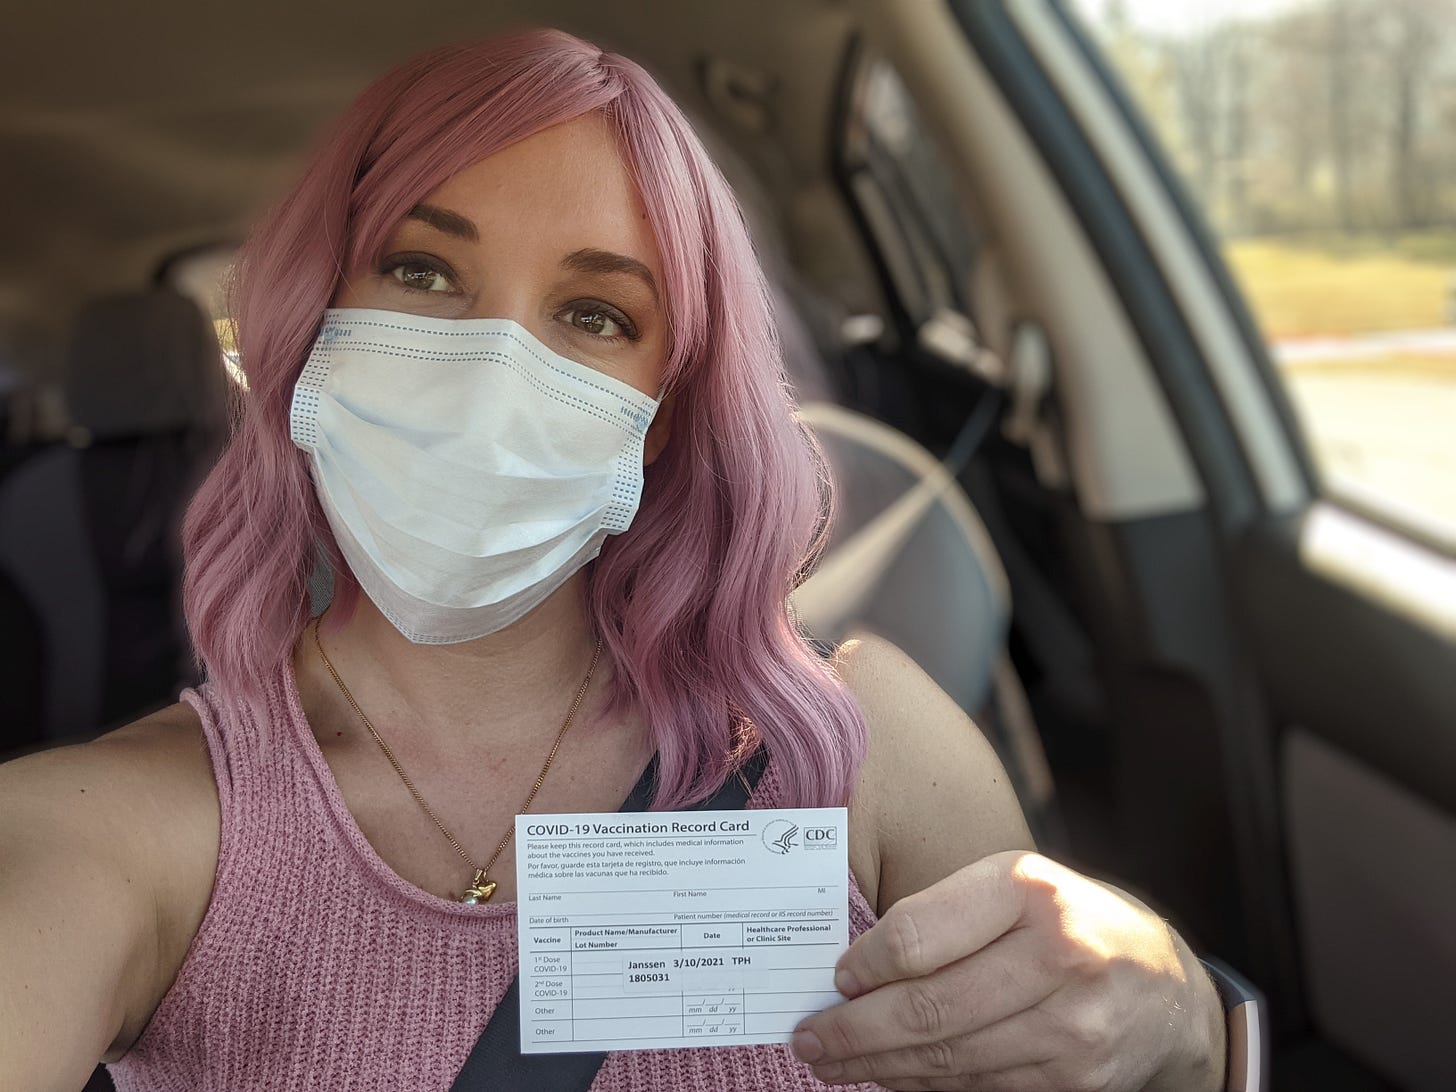 Vaccine selfie with pink hair